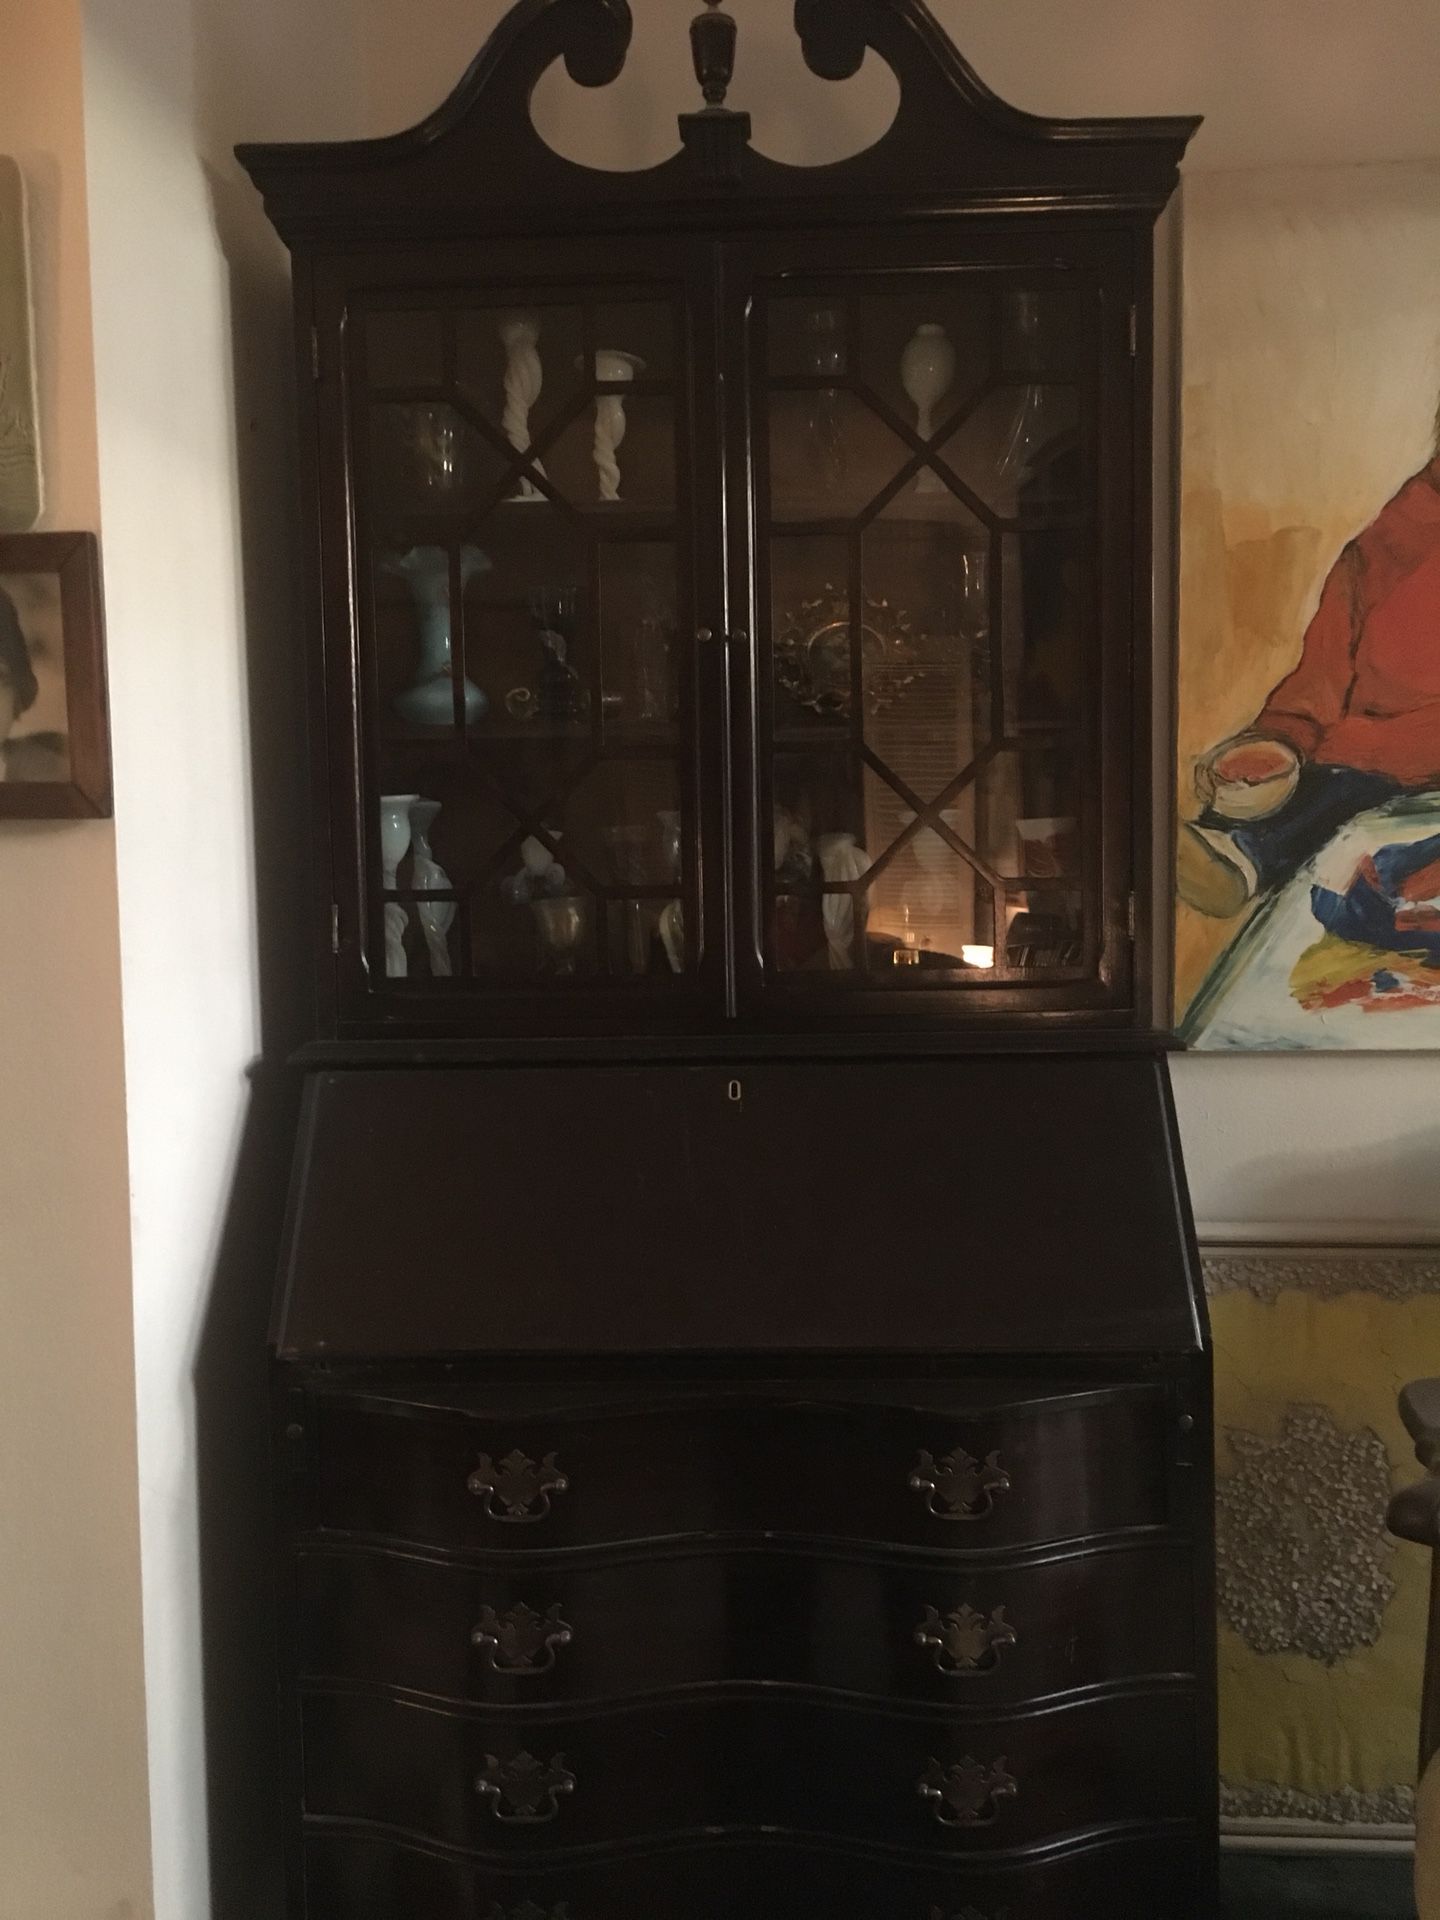 Antique Federal Desk. In our family since 1940